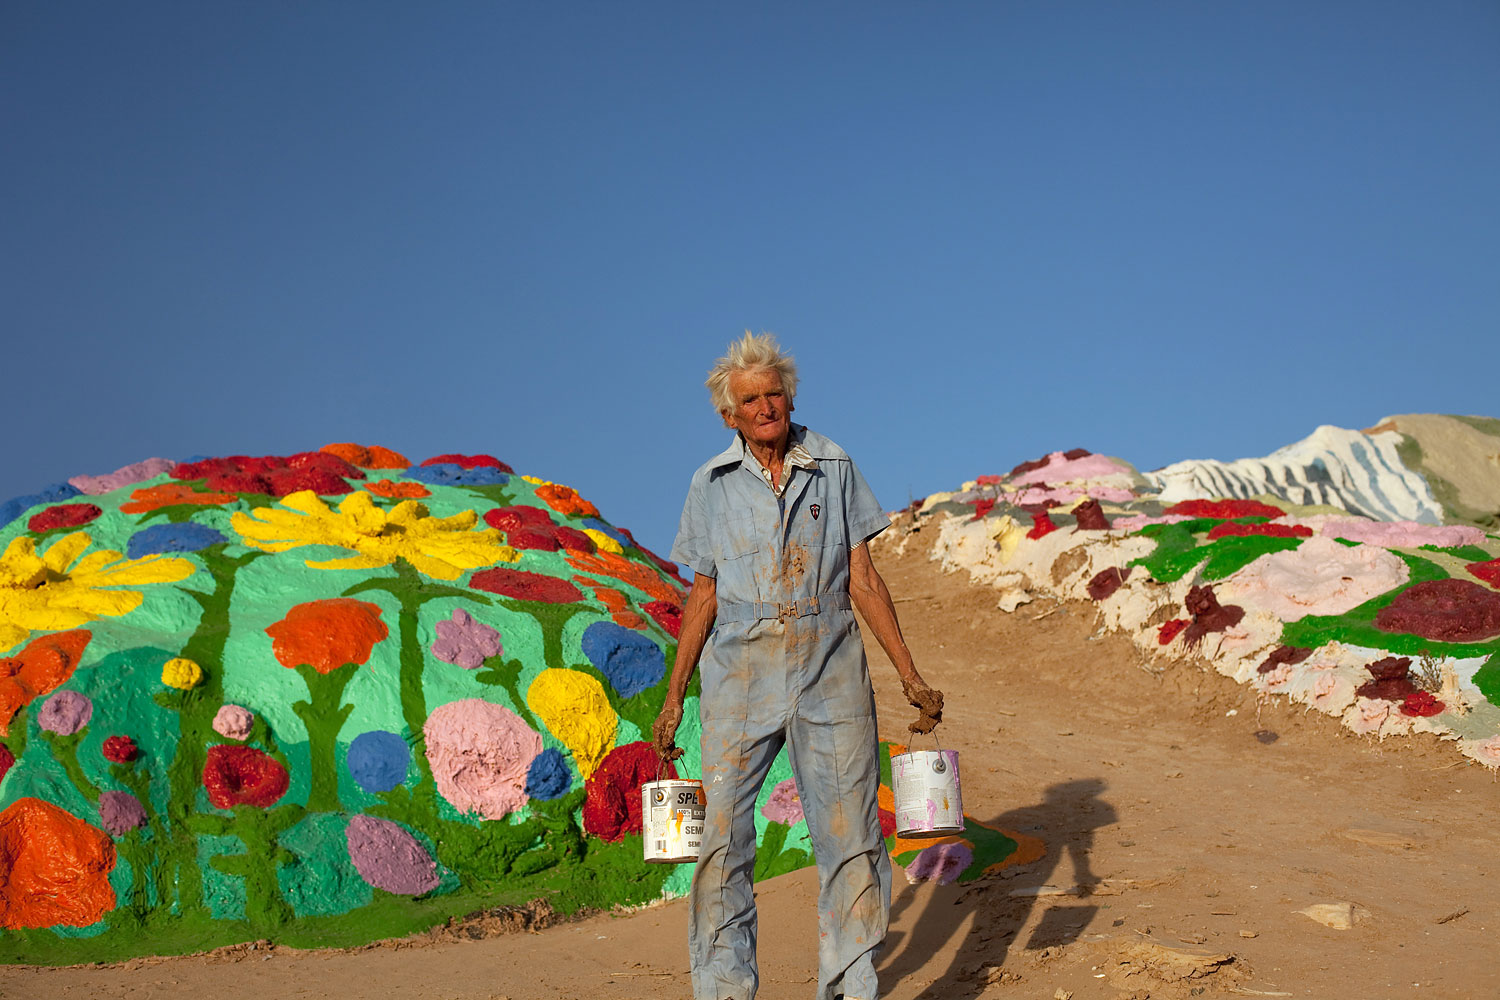 Knight paints a peripheral mound covered in flowers, one of his common themes.